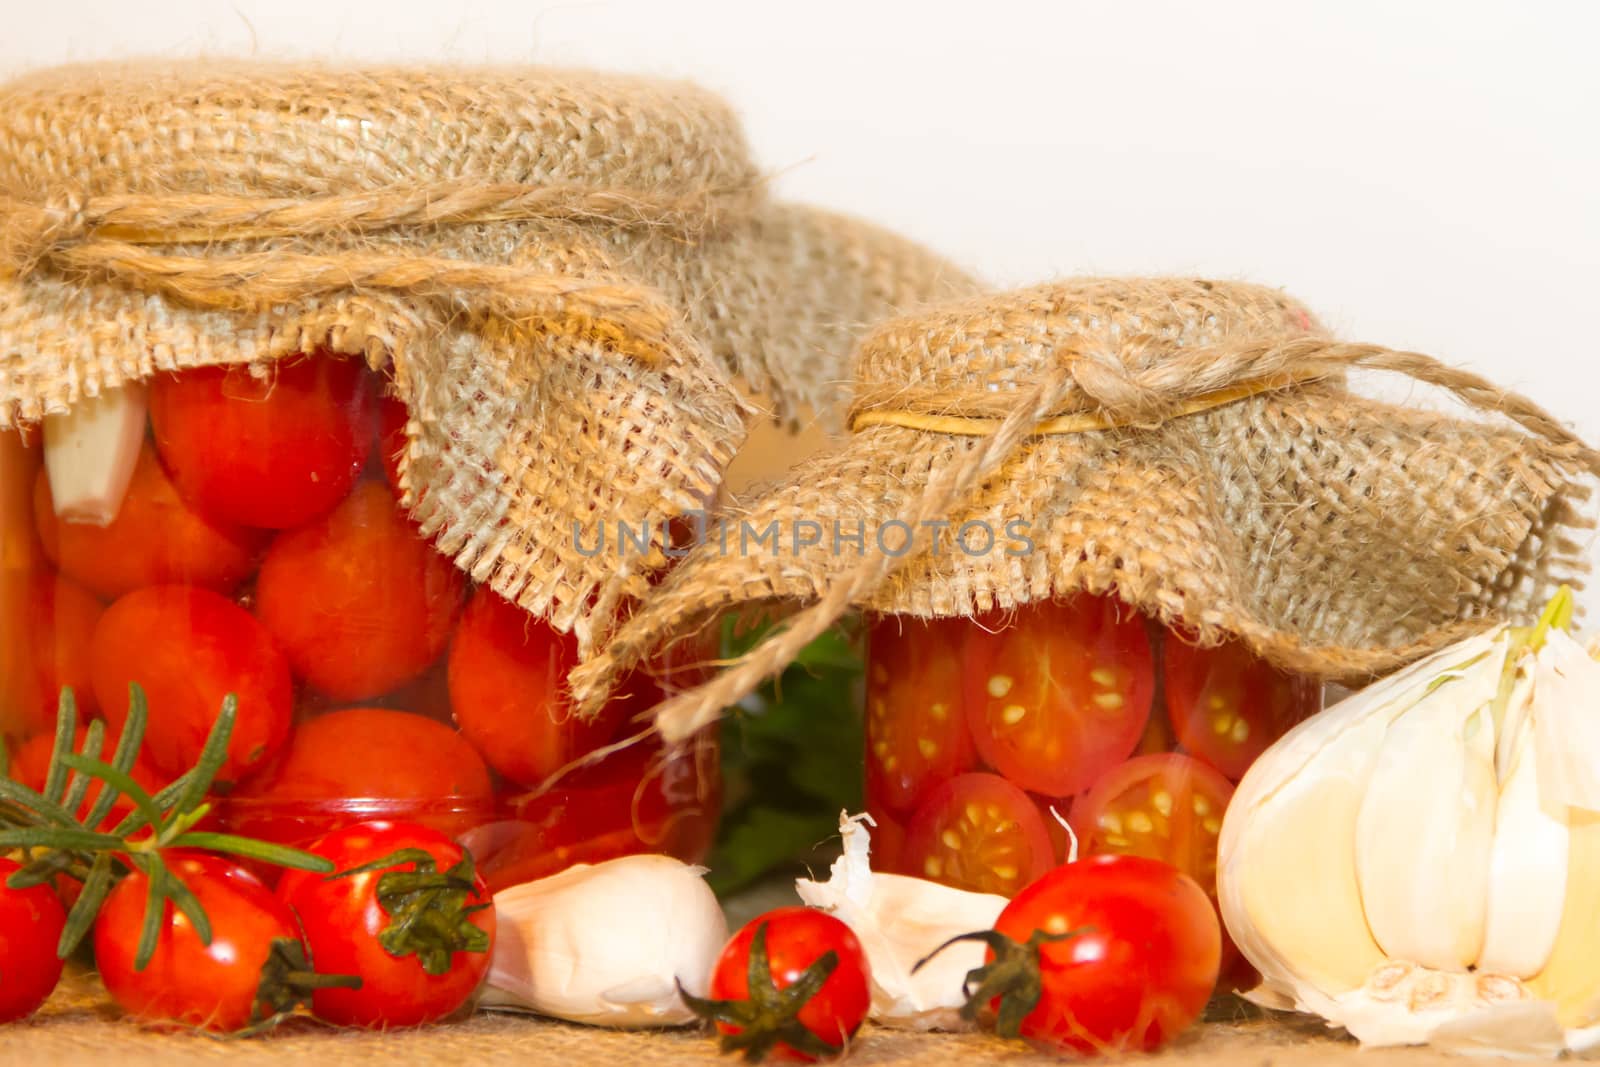 pickled cherry tomatoes in vinegar with garlic and spices by GabrielaBertolini